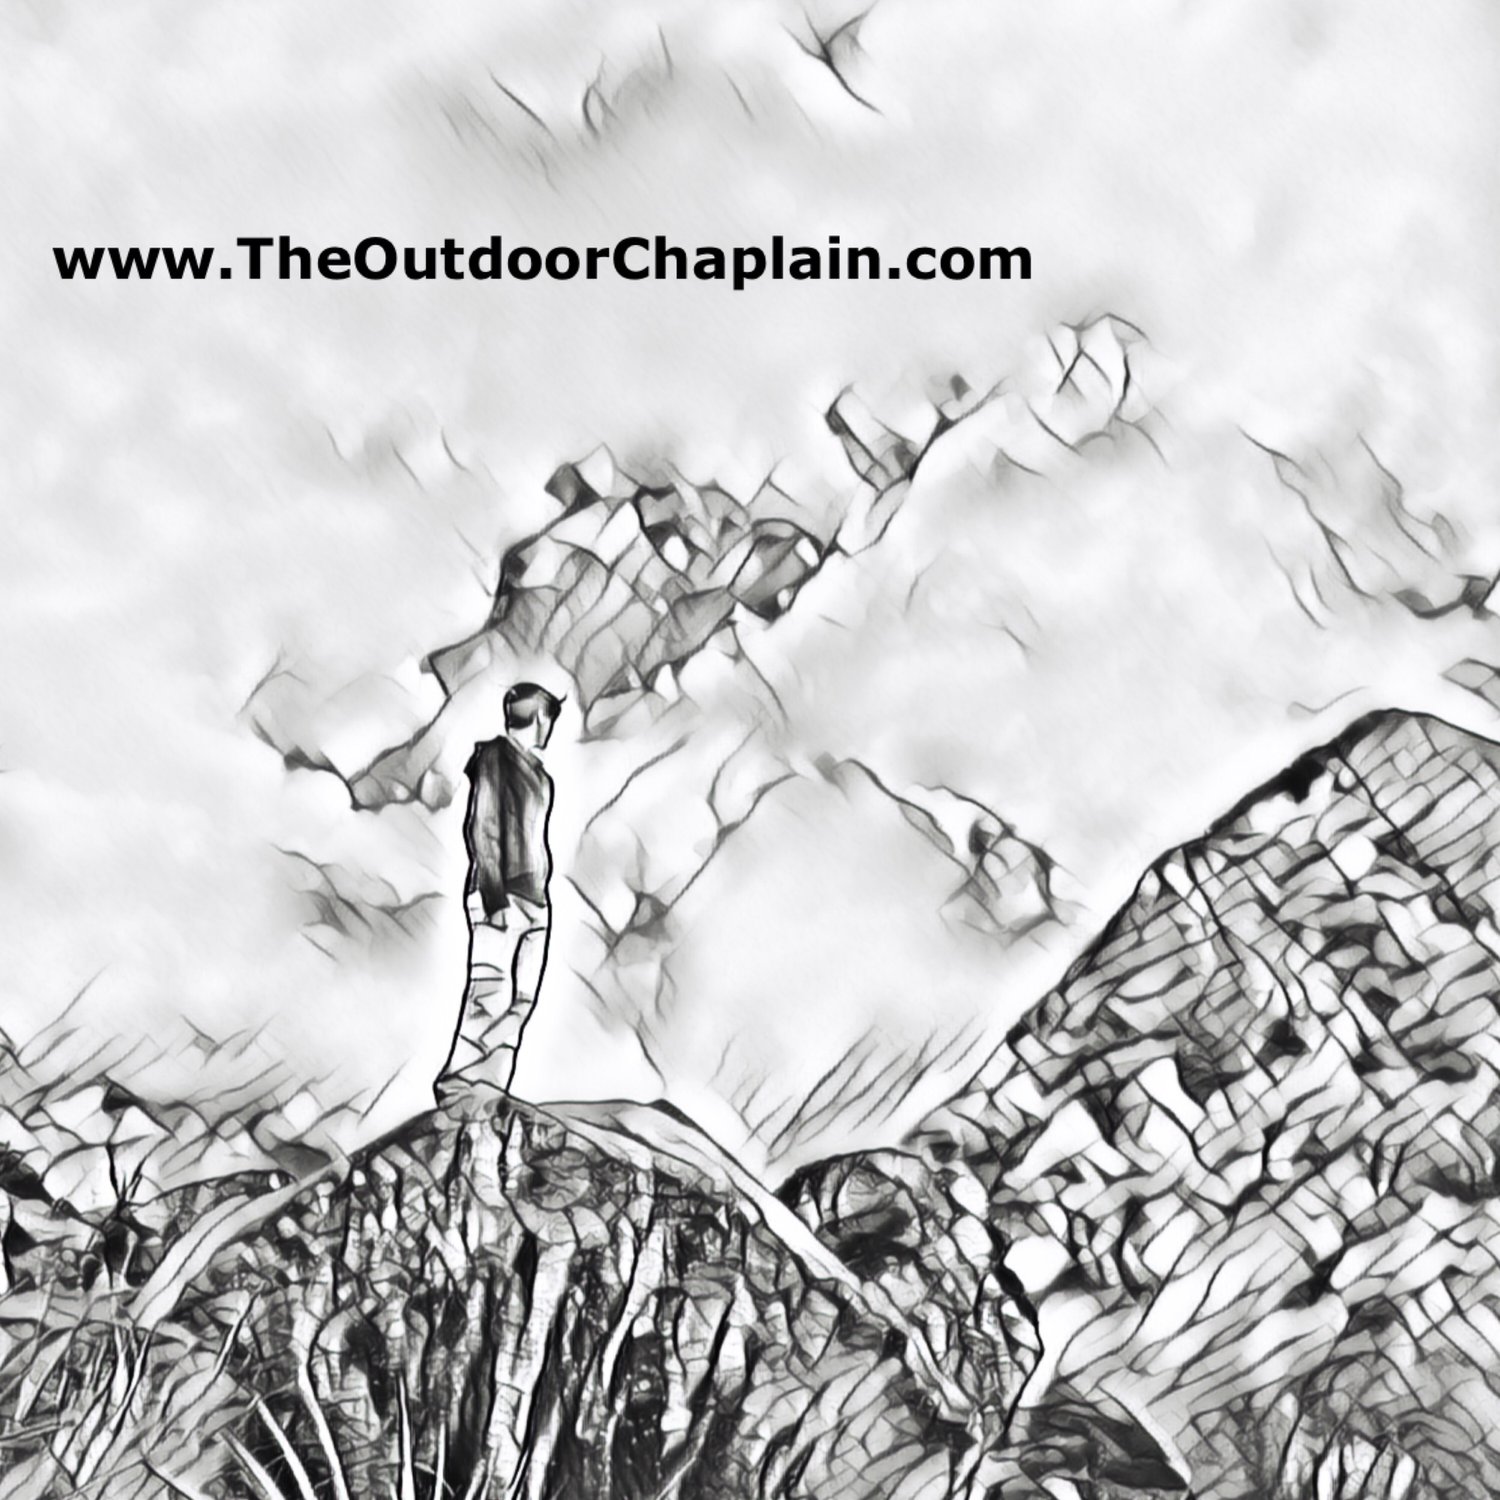 The Outdoor Chaplain